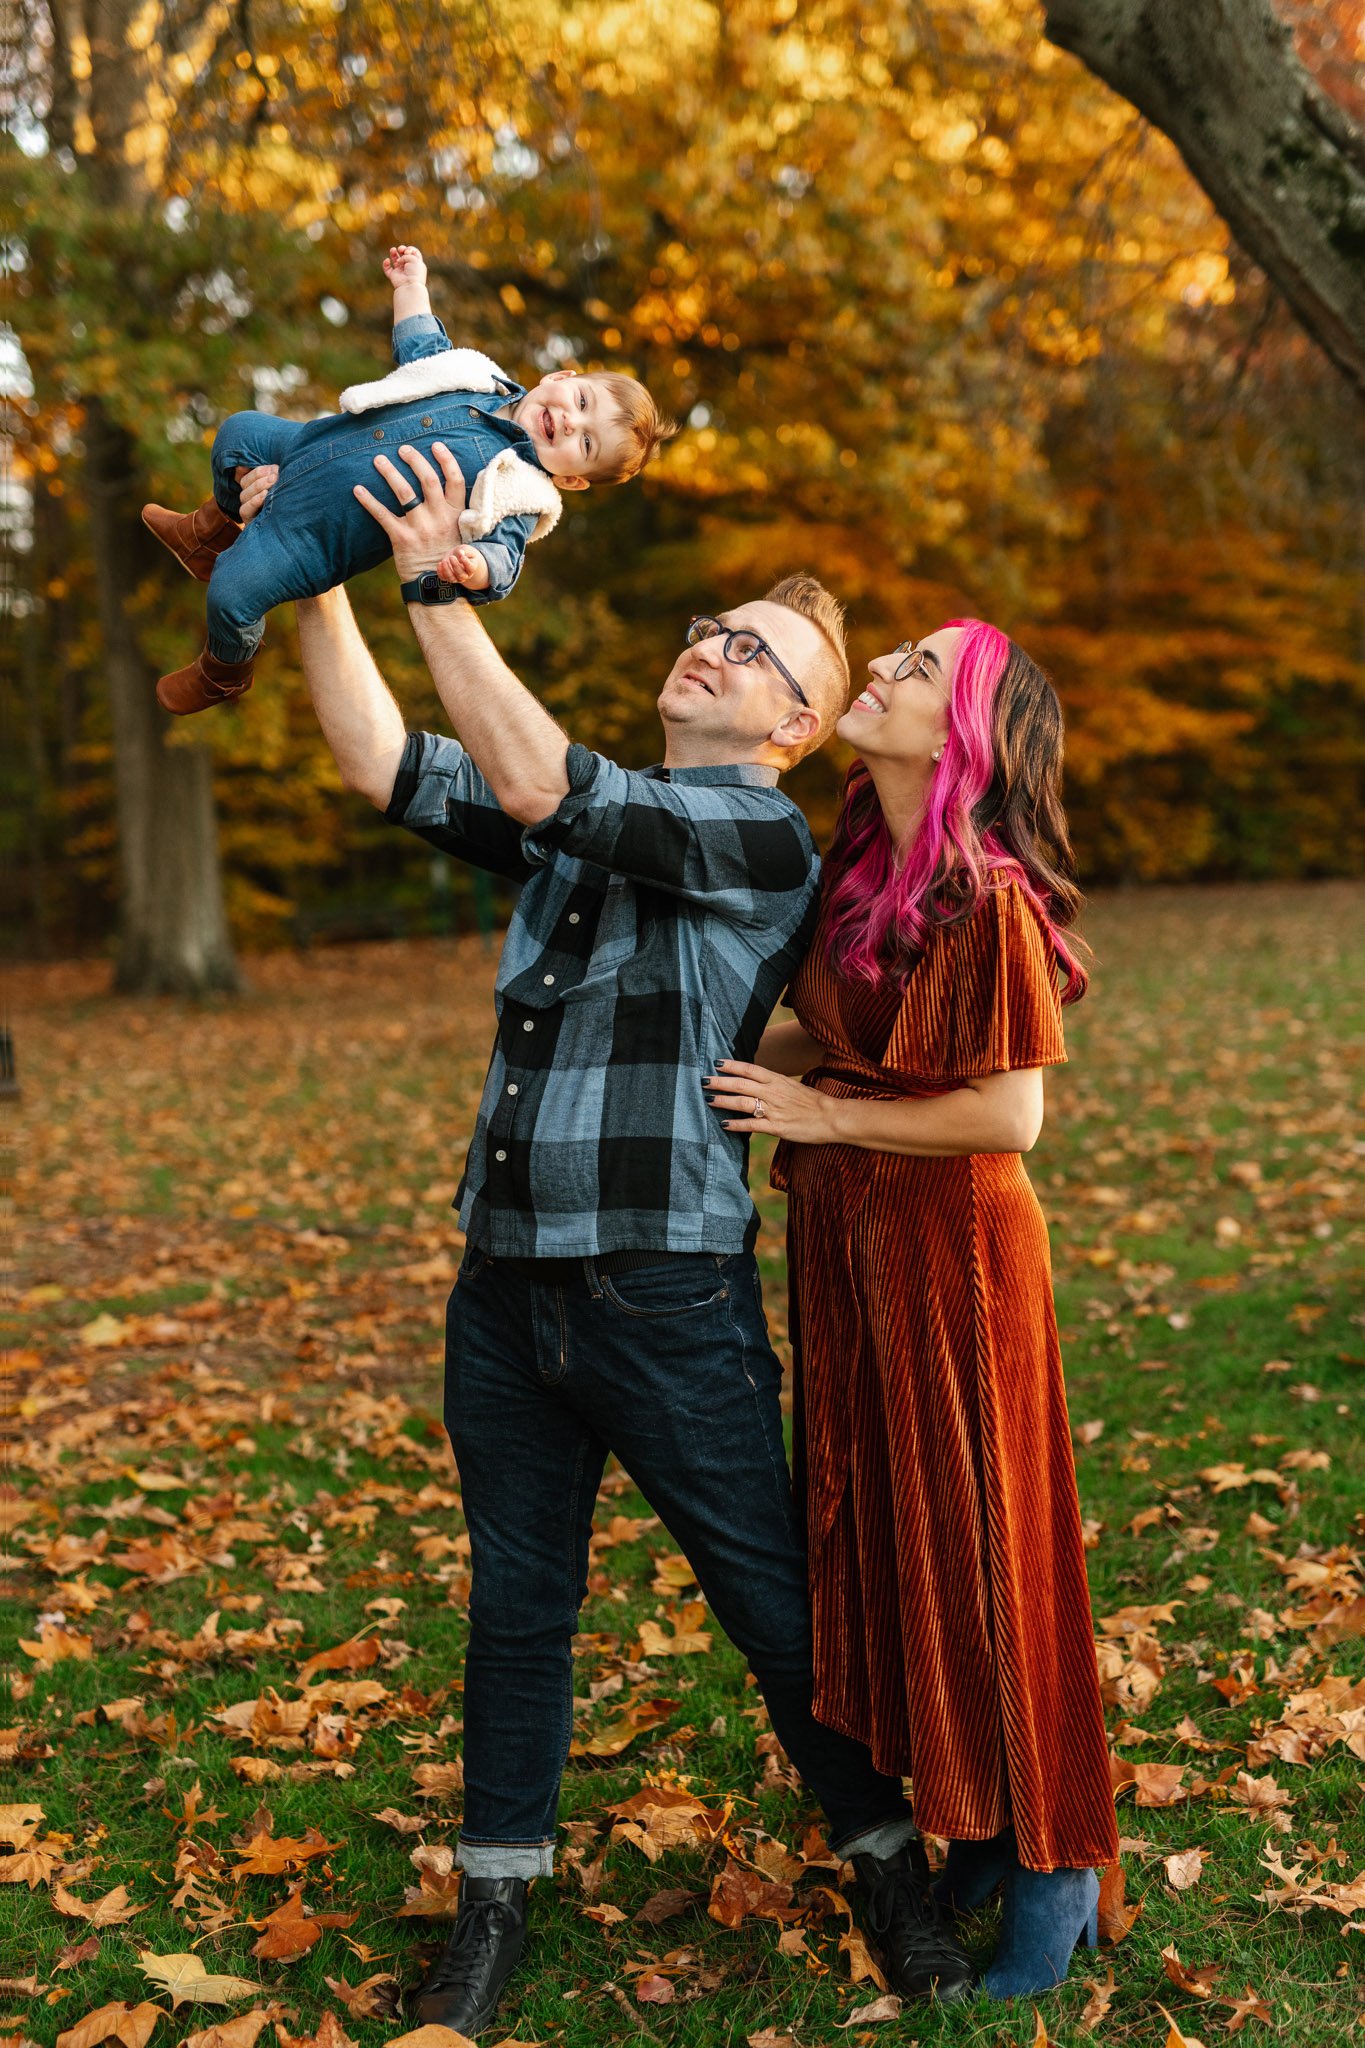  baby giggles as her daddy throws her in the air by Nicole Hawkins Photography in New Jersey. father throwing baby #NicoleHawkinsPhotography #NicoleHawkinsFamily #fallfamilyphotos #fallphotos #familyphotographerNJ #NJfallfamilypics 